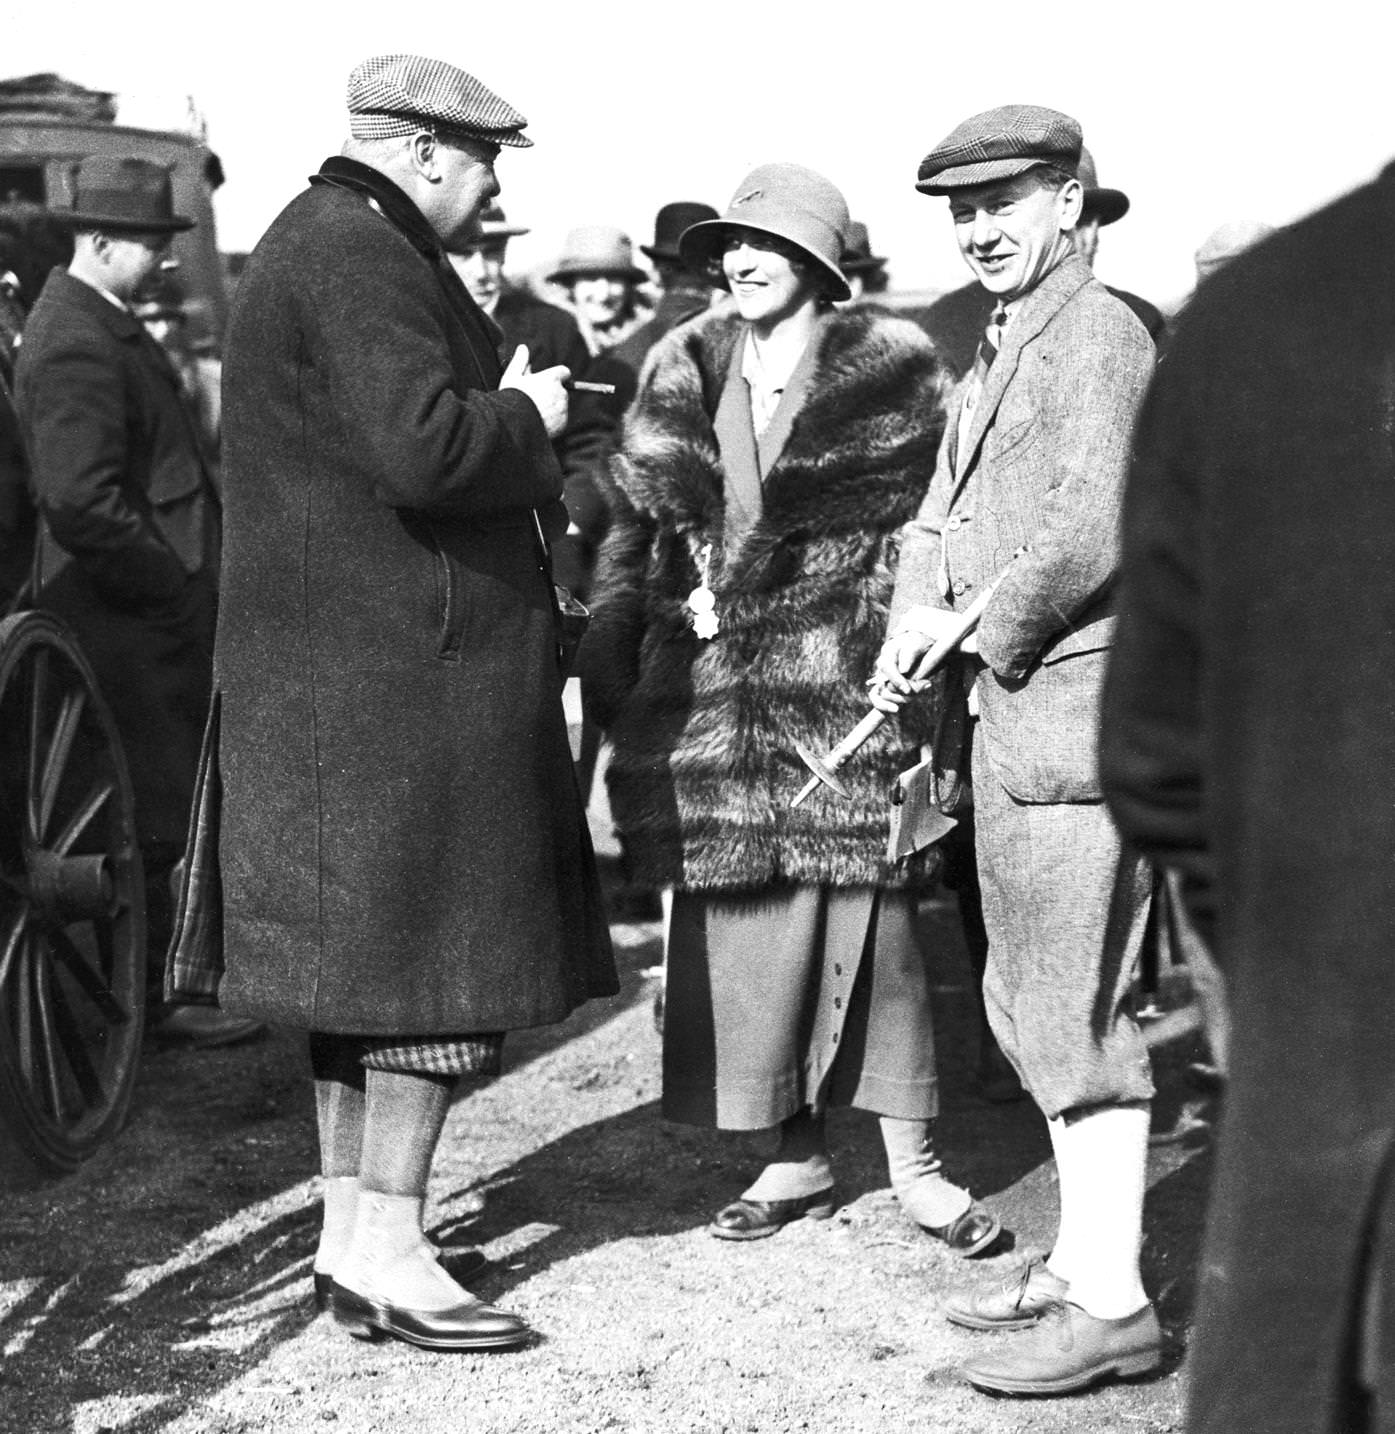 Sir Robert Jardine (left), Mrs Charles Glover and Captain Hog on the first day of the Waterloo Cup hare coursing event at Altcar, near Liverpool, 13th March 1924.